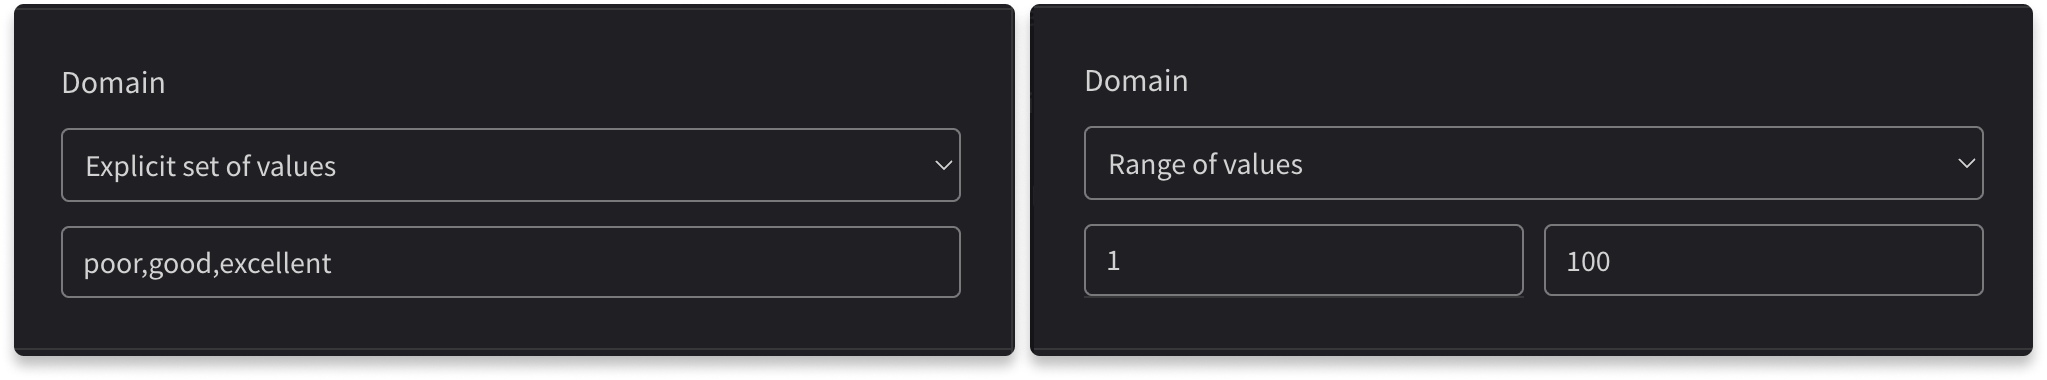 LiveChat Property Domain